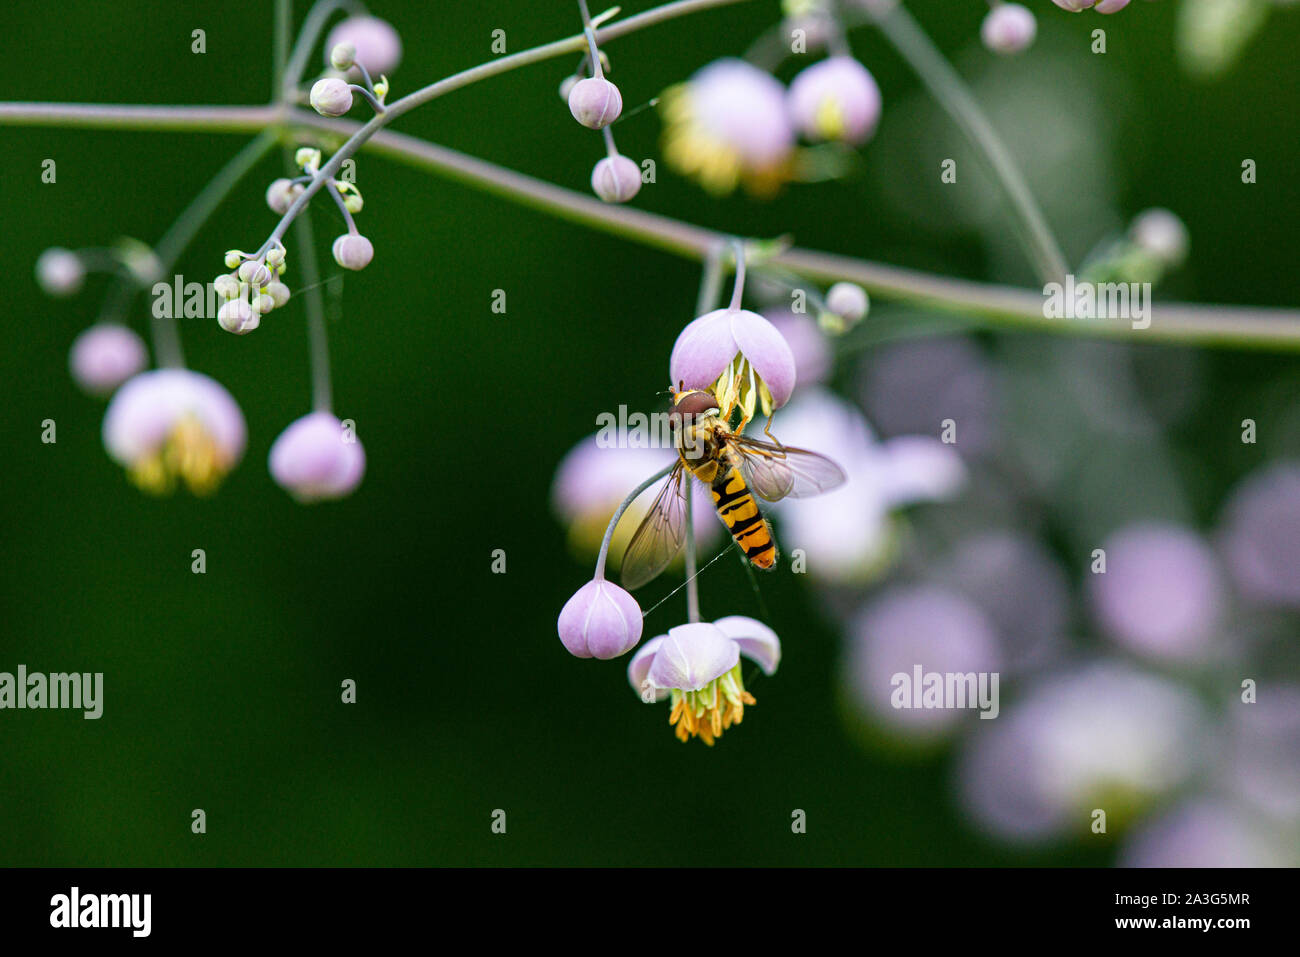 A marmalade hoverfly (Episyrphus balteatus) on the flowers of a Thalictrum Stock Photo